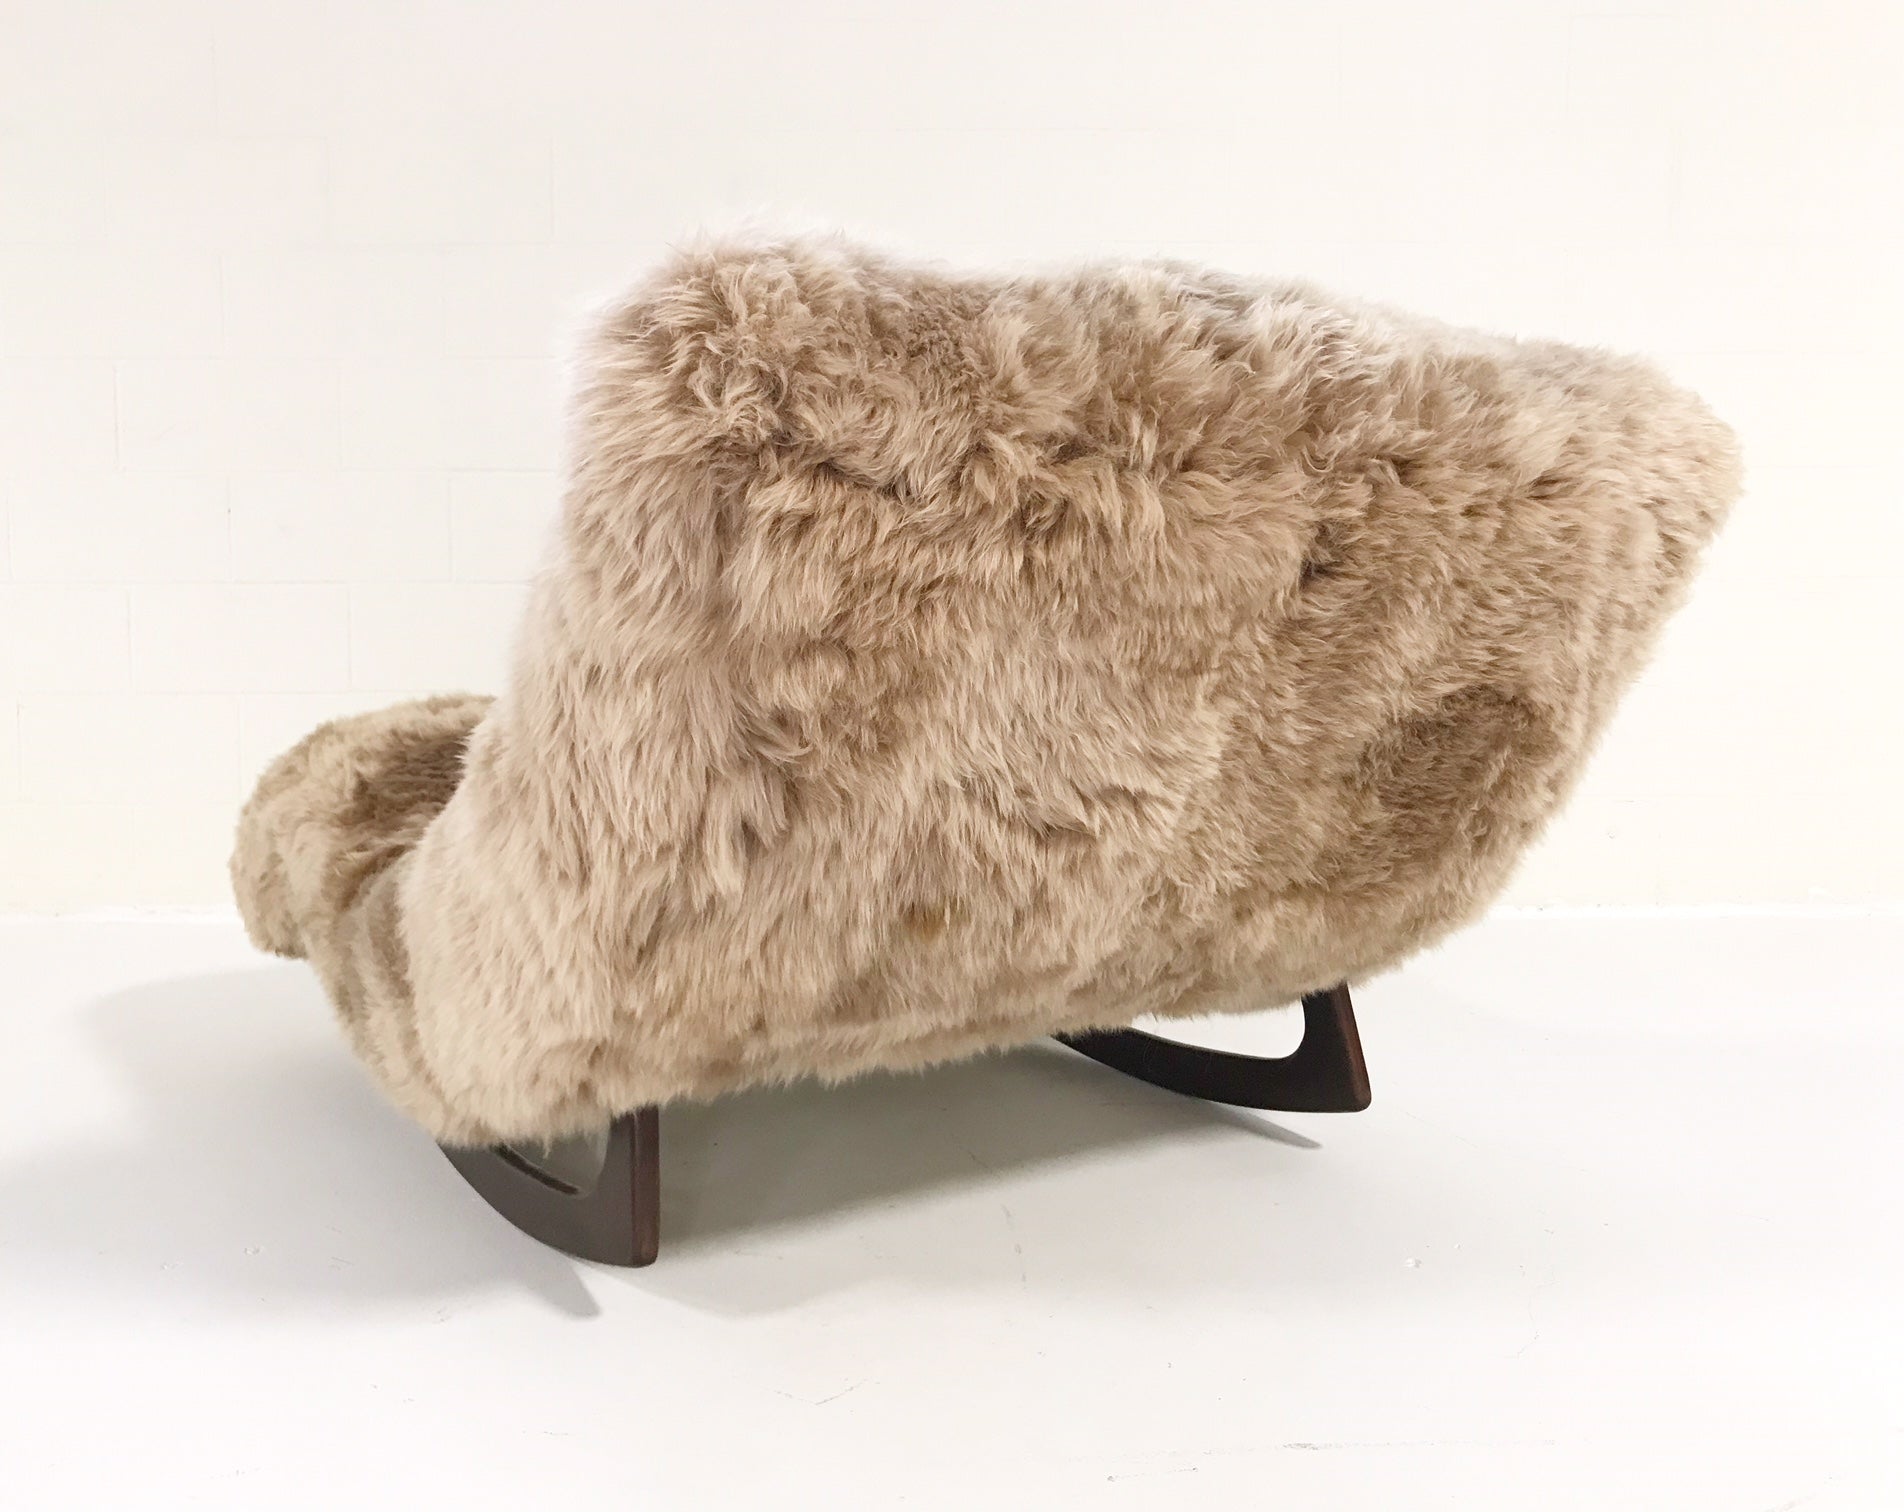 Rocking Wave Chaise Lounge in New Zealand Sheepskin - FORSYTH